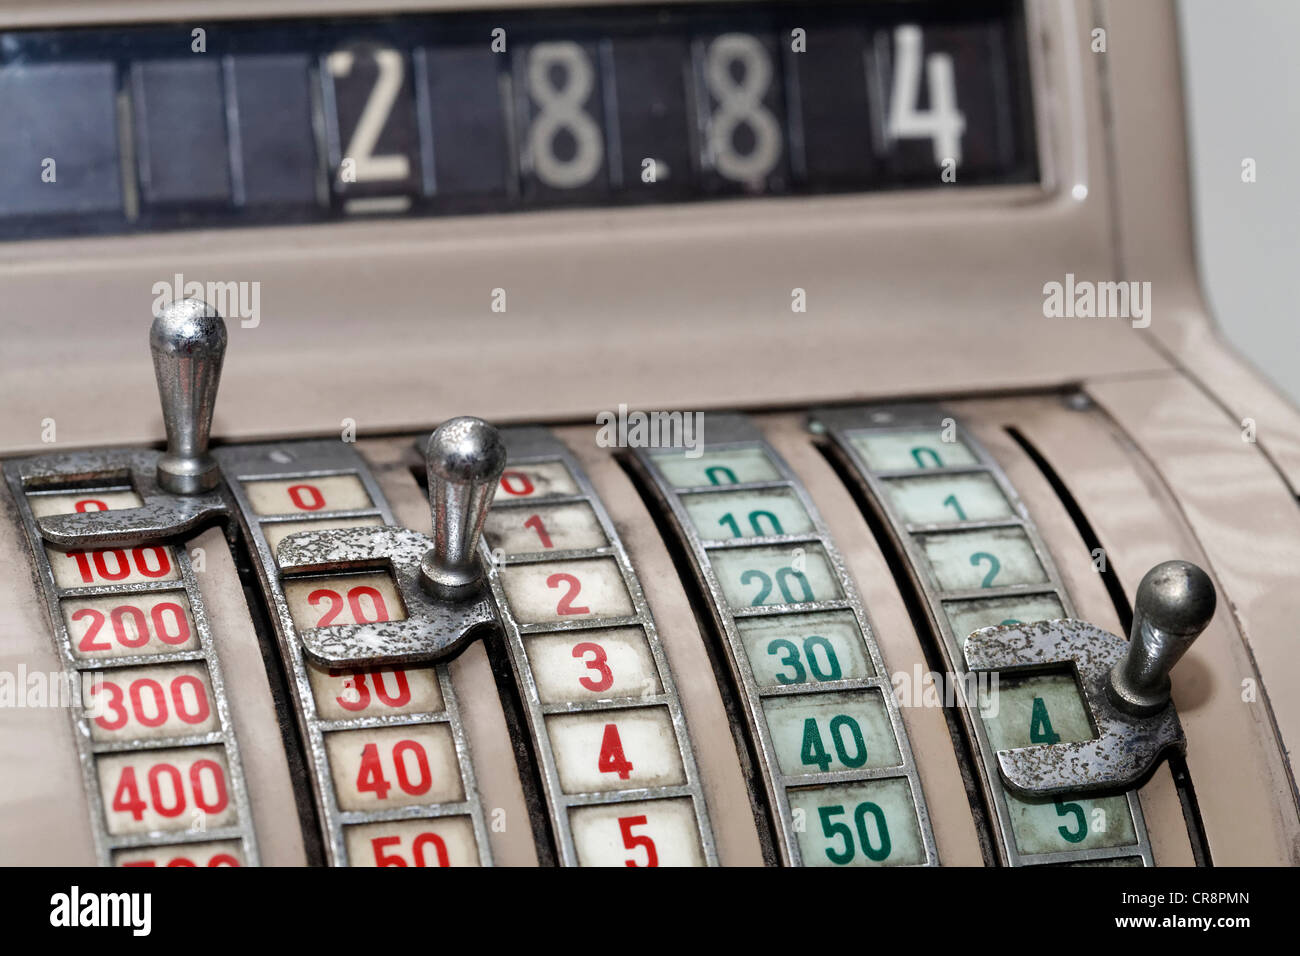 Old mechanical cash register with slides from the 1950s, Germany, Europe Stock Photo